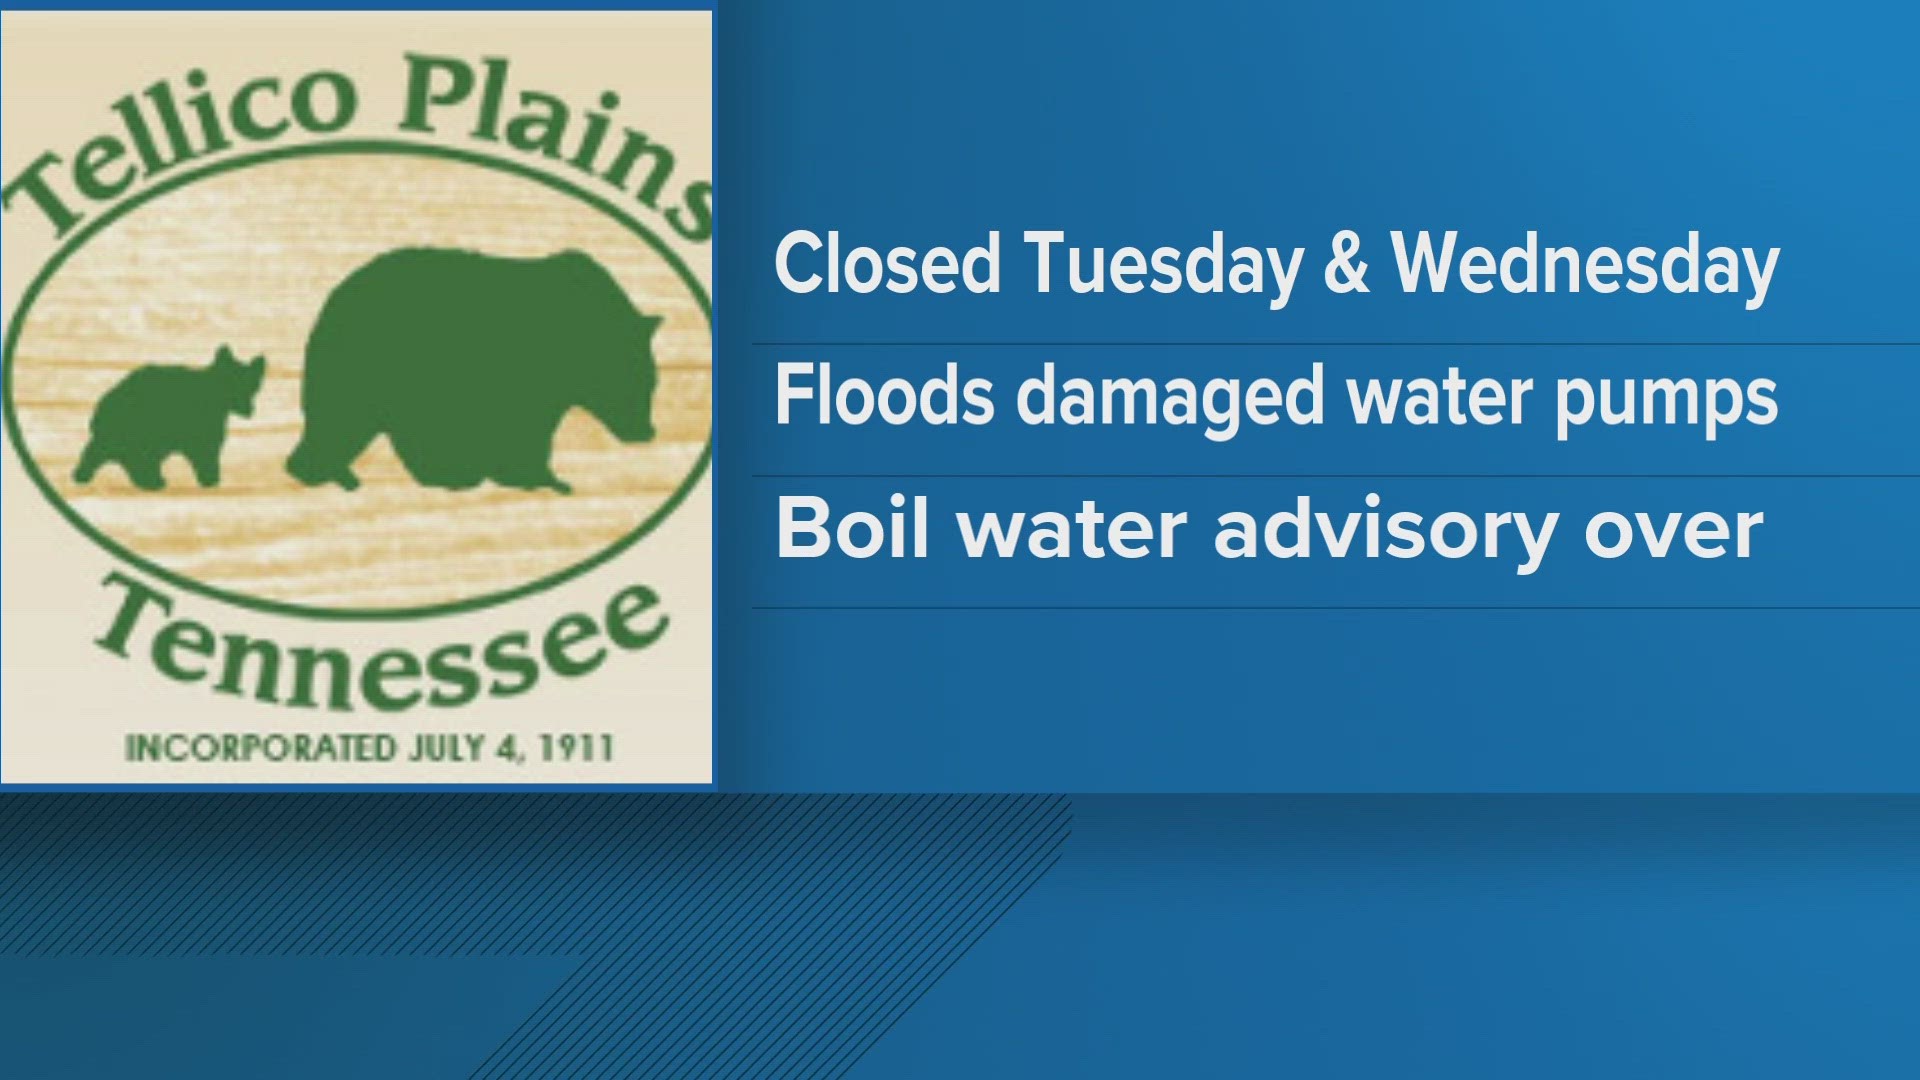 Schools were closed Wednesday and Thursday after the floods Tuesday. Tellico Plains is also not under a boil water advisory.